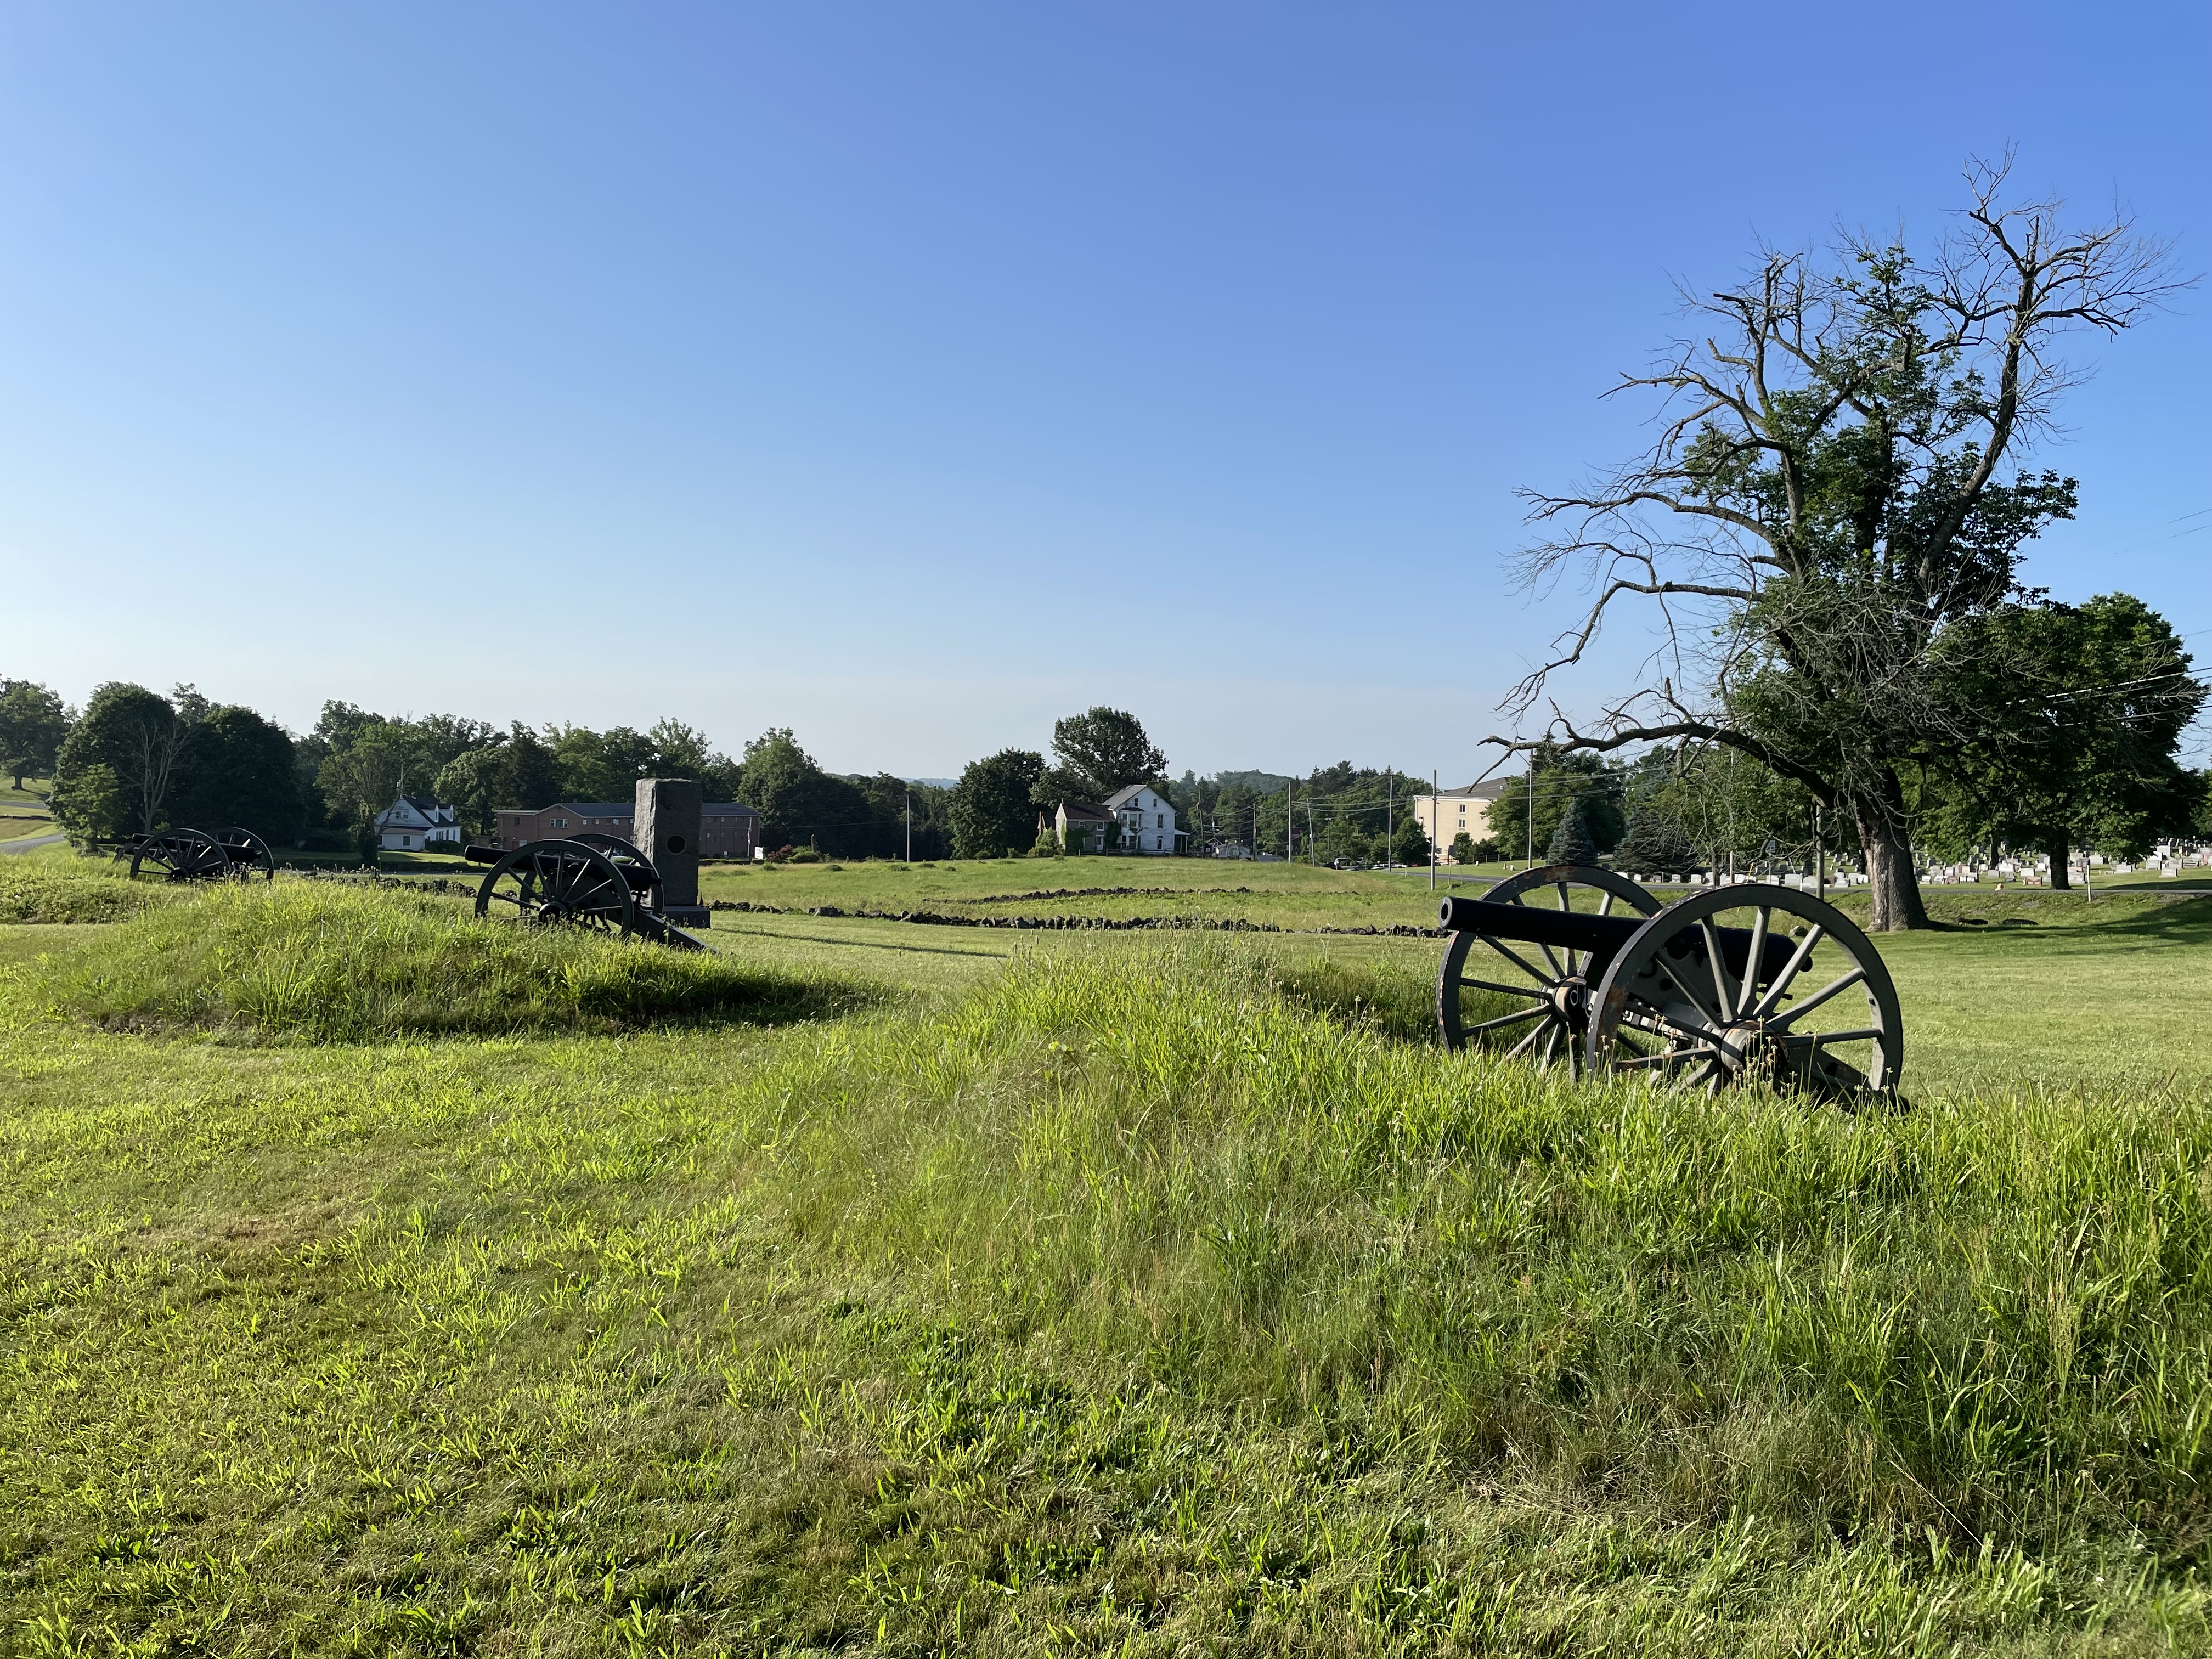 Canon and a granite monument in the foreground frame the view of the fields; a white house and a long brick building are at the horizon to the left and cemetery headstones are visible across the road at right.